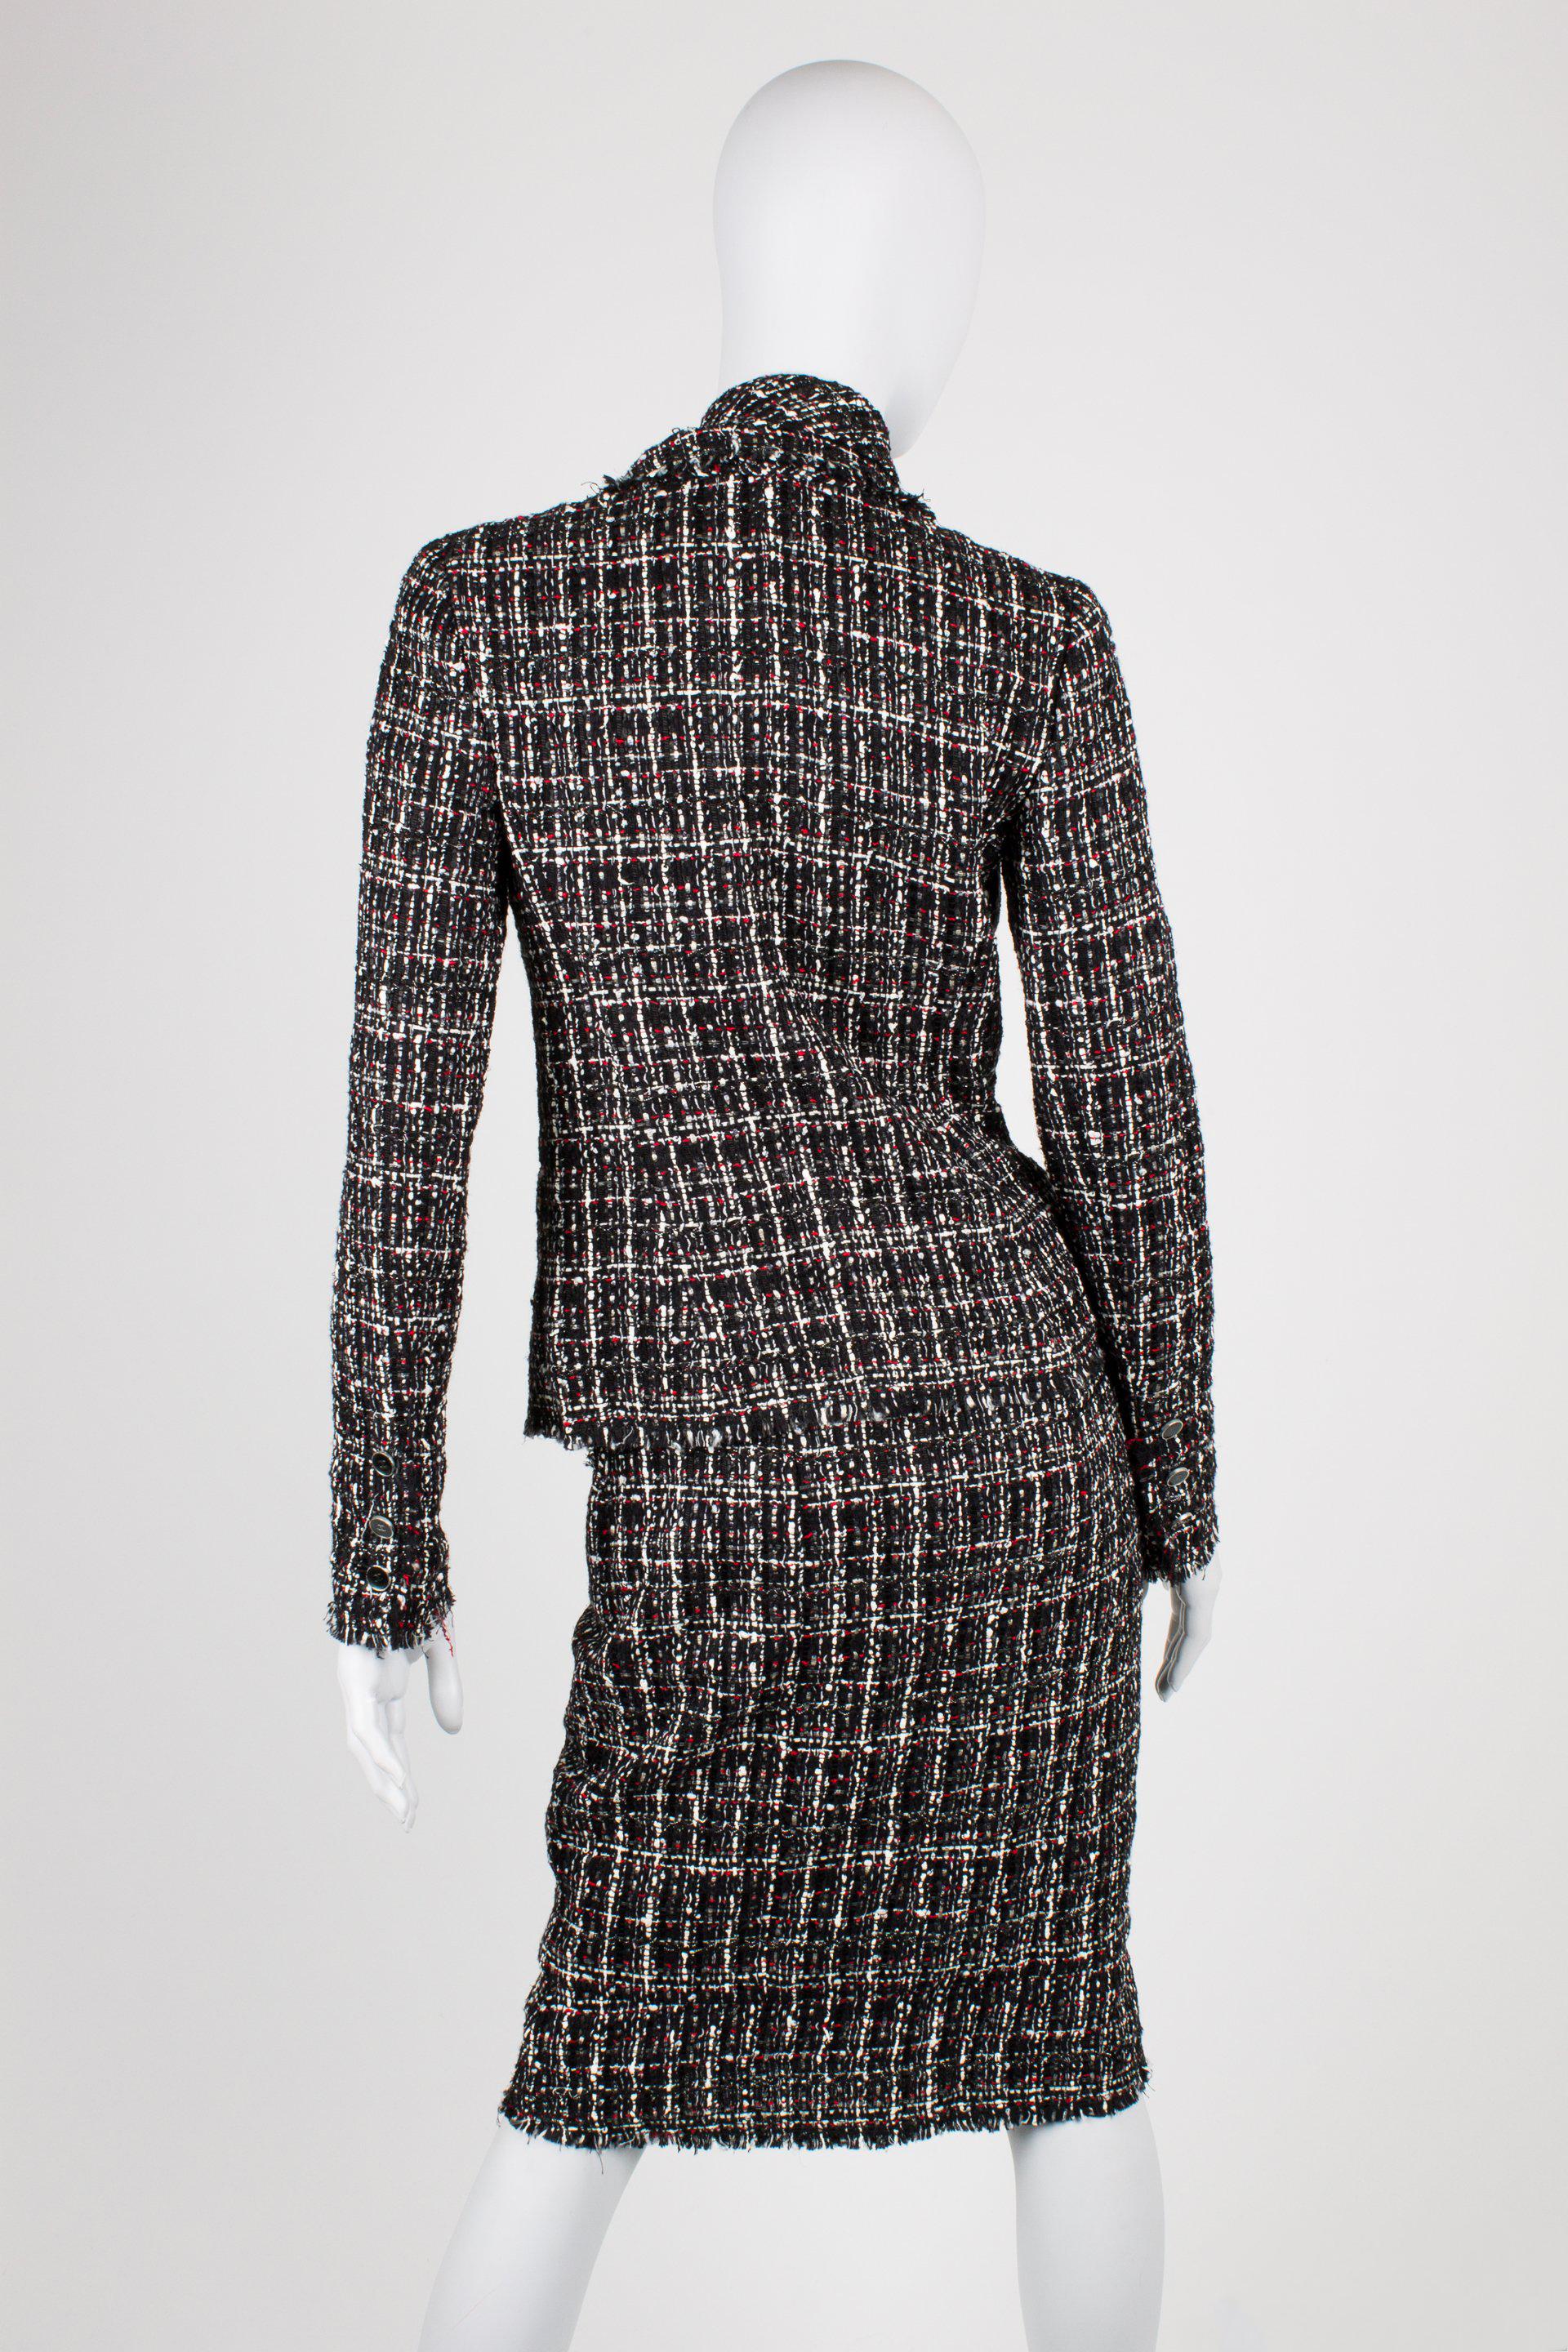 Women's Chanel Suit 3-pcs Jacket, Skirt & Tie - black/white/grey/red For Sale